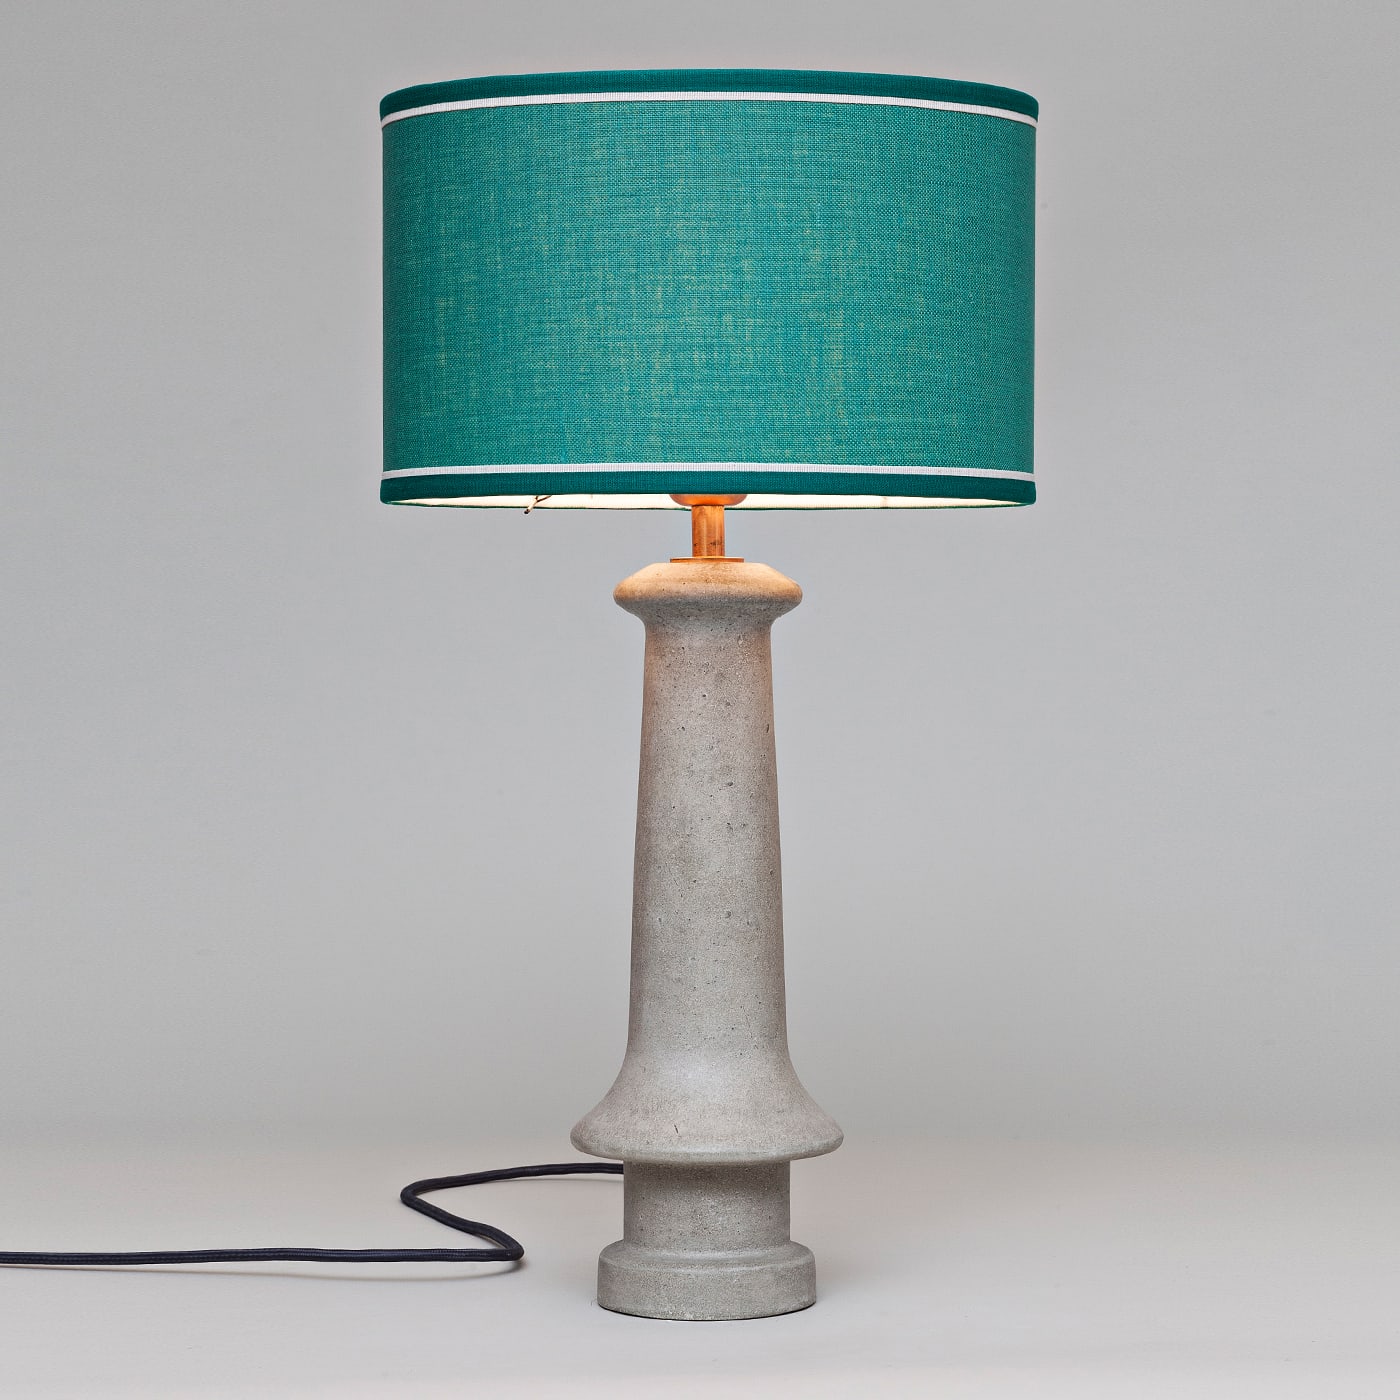 Cement Turquoise Table Lamp - Servomuto